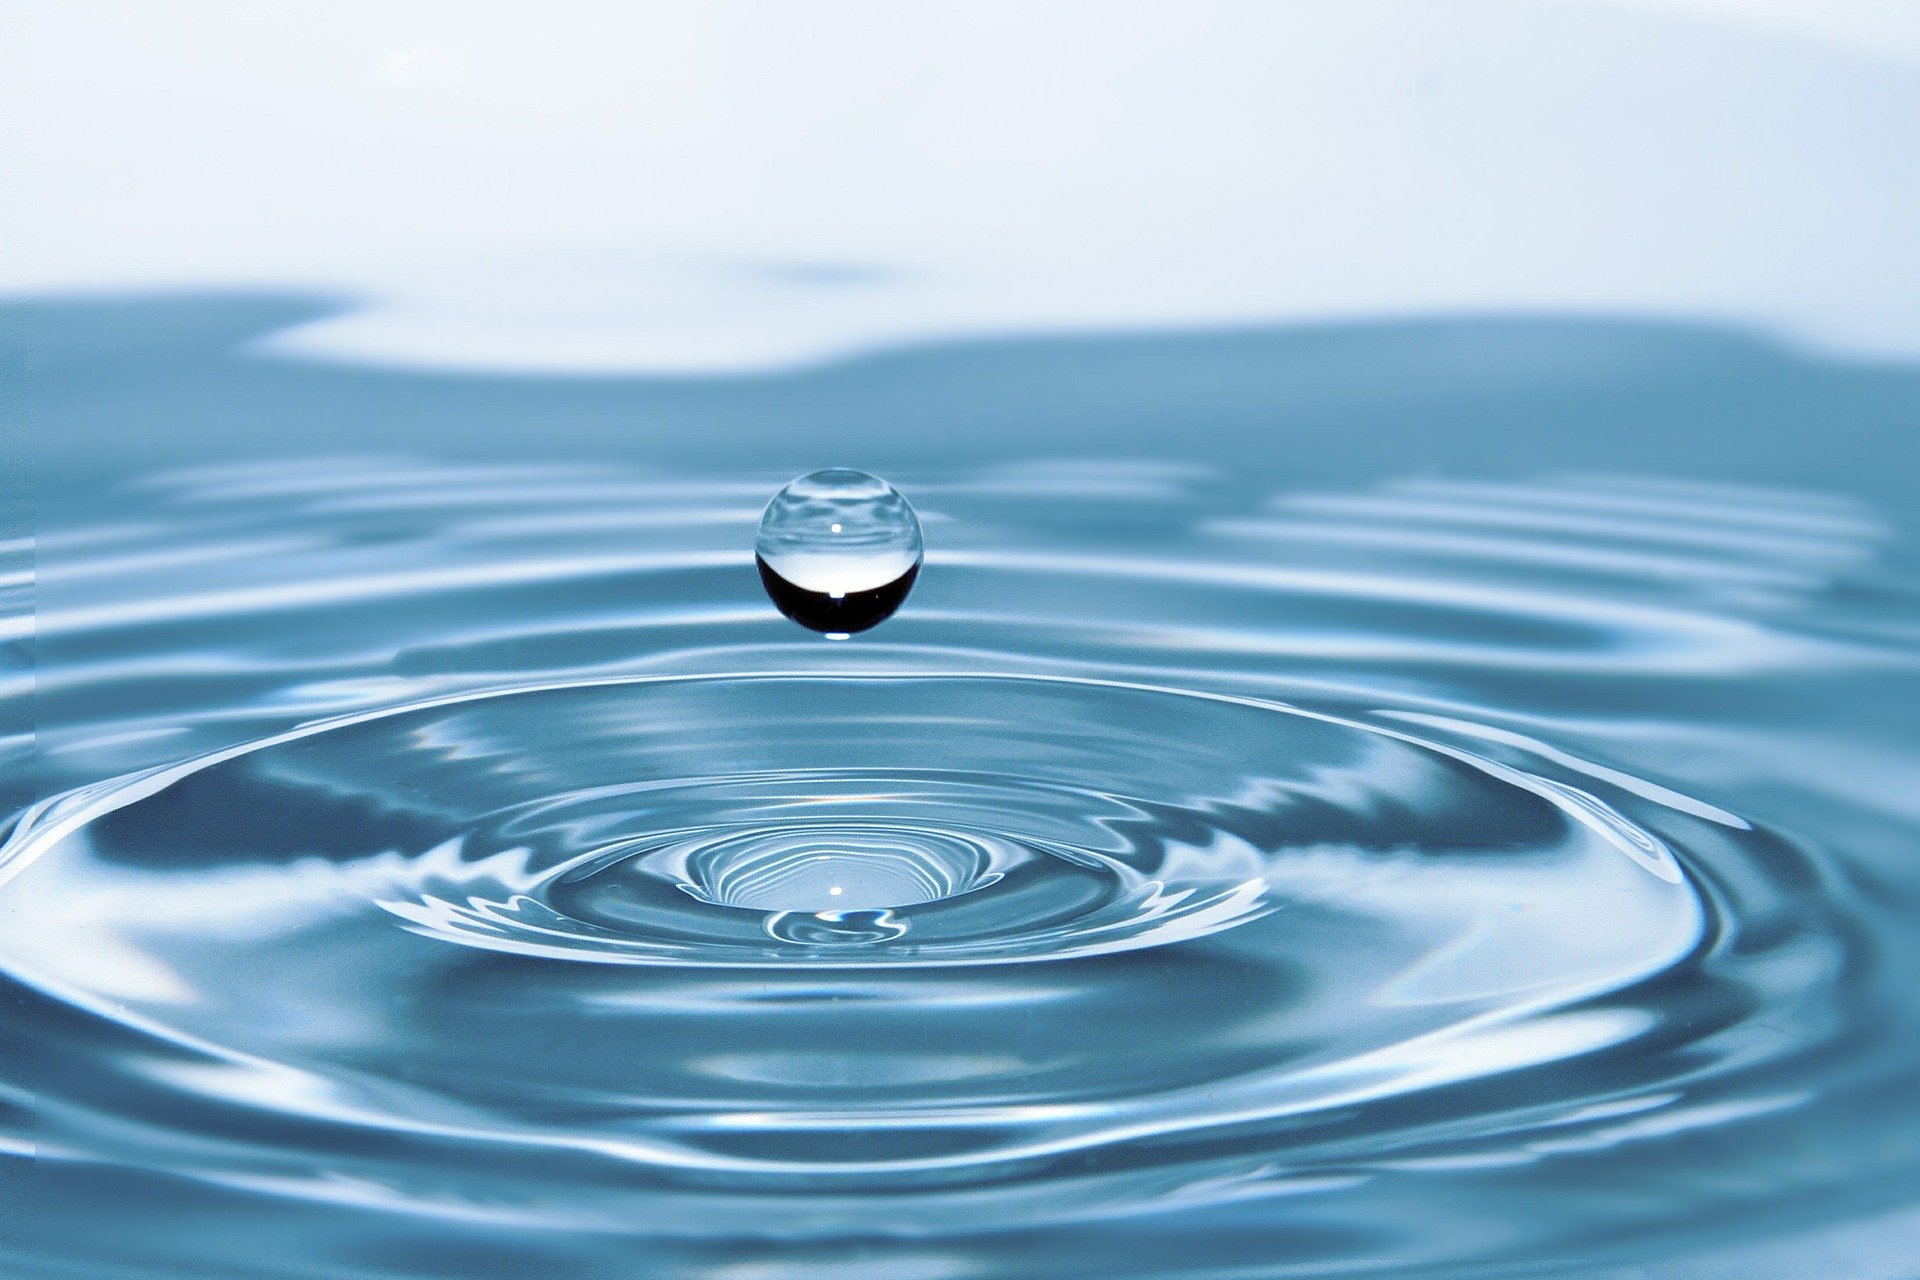 drop of water, Image by rony michaud from Pixabay